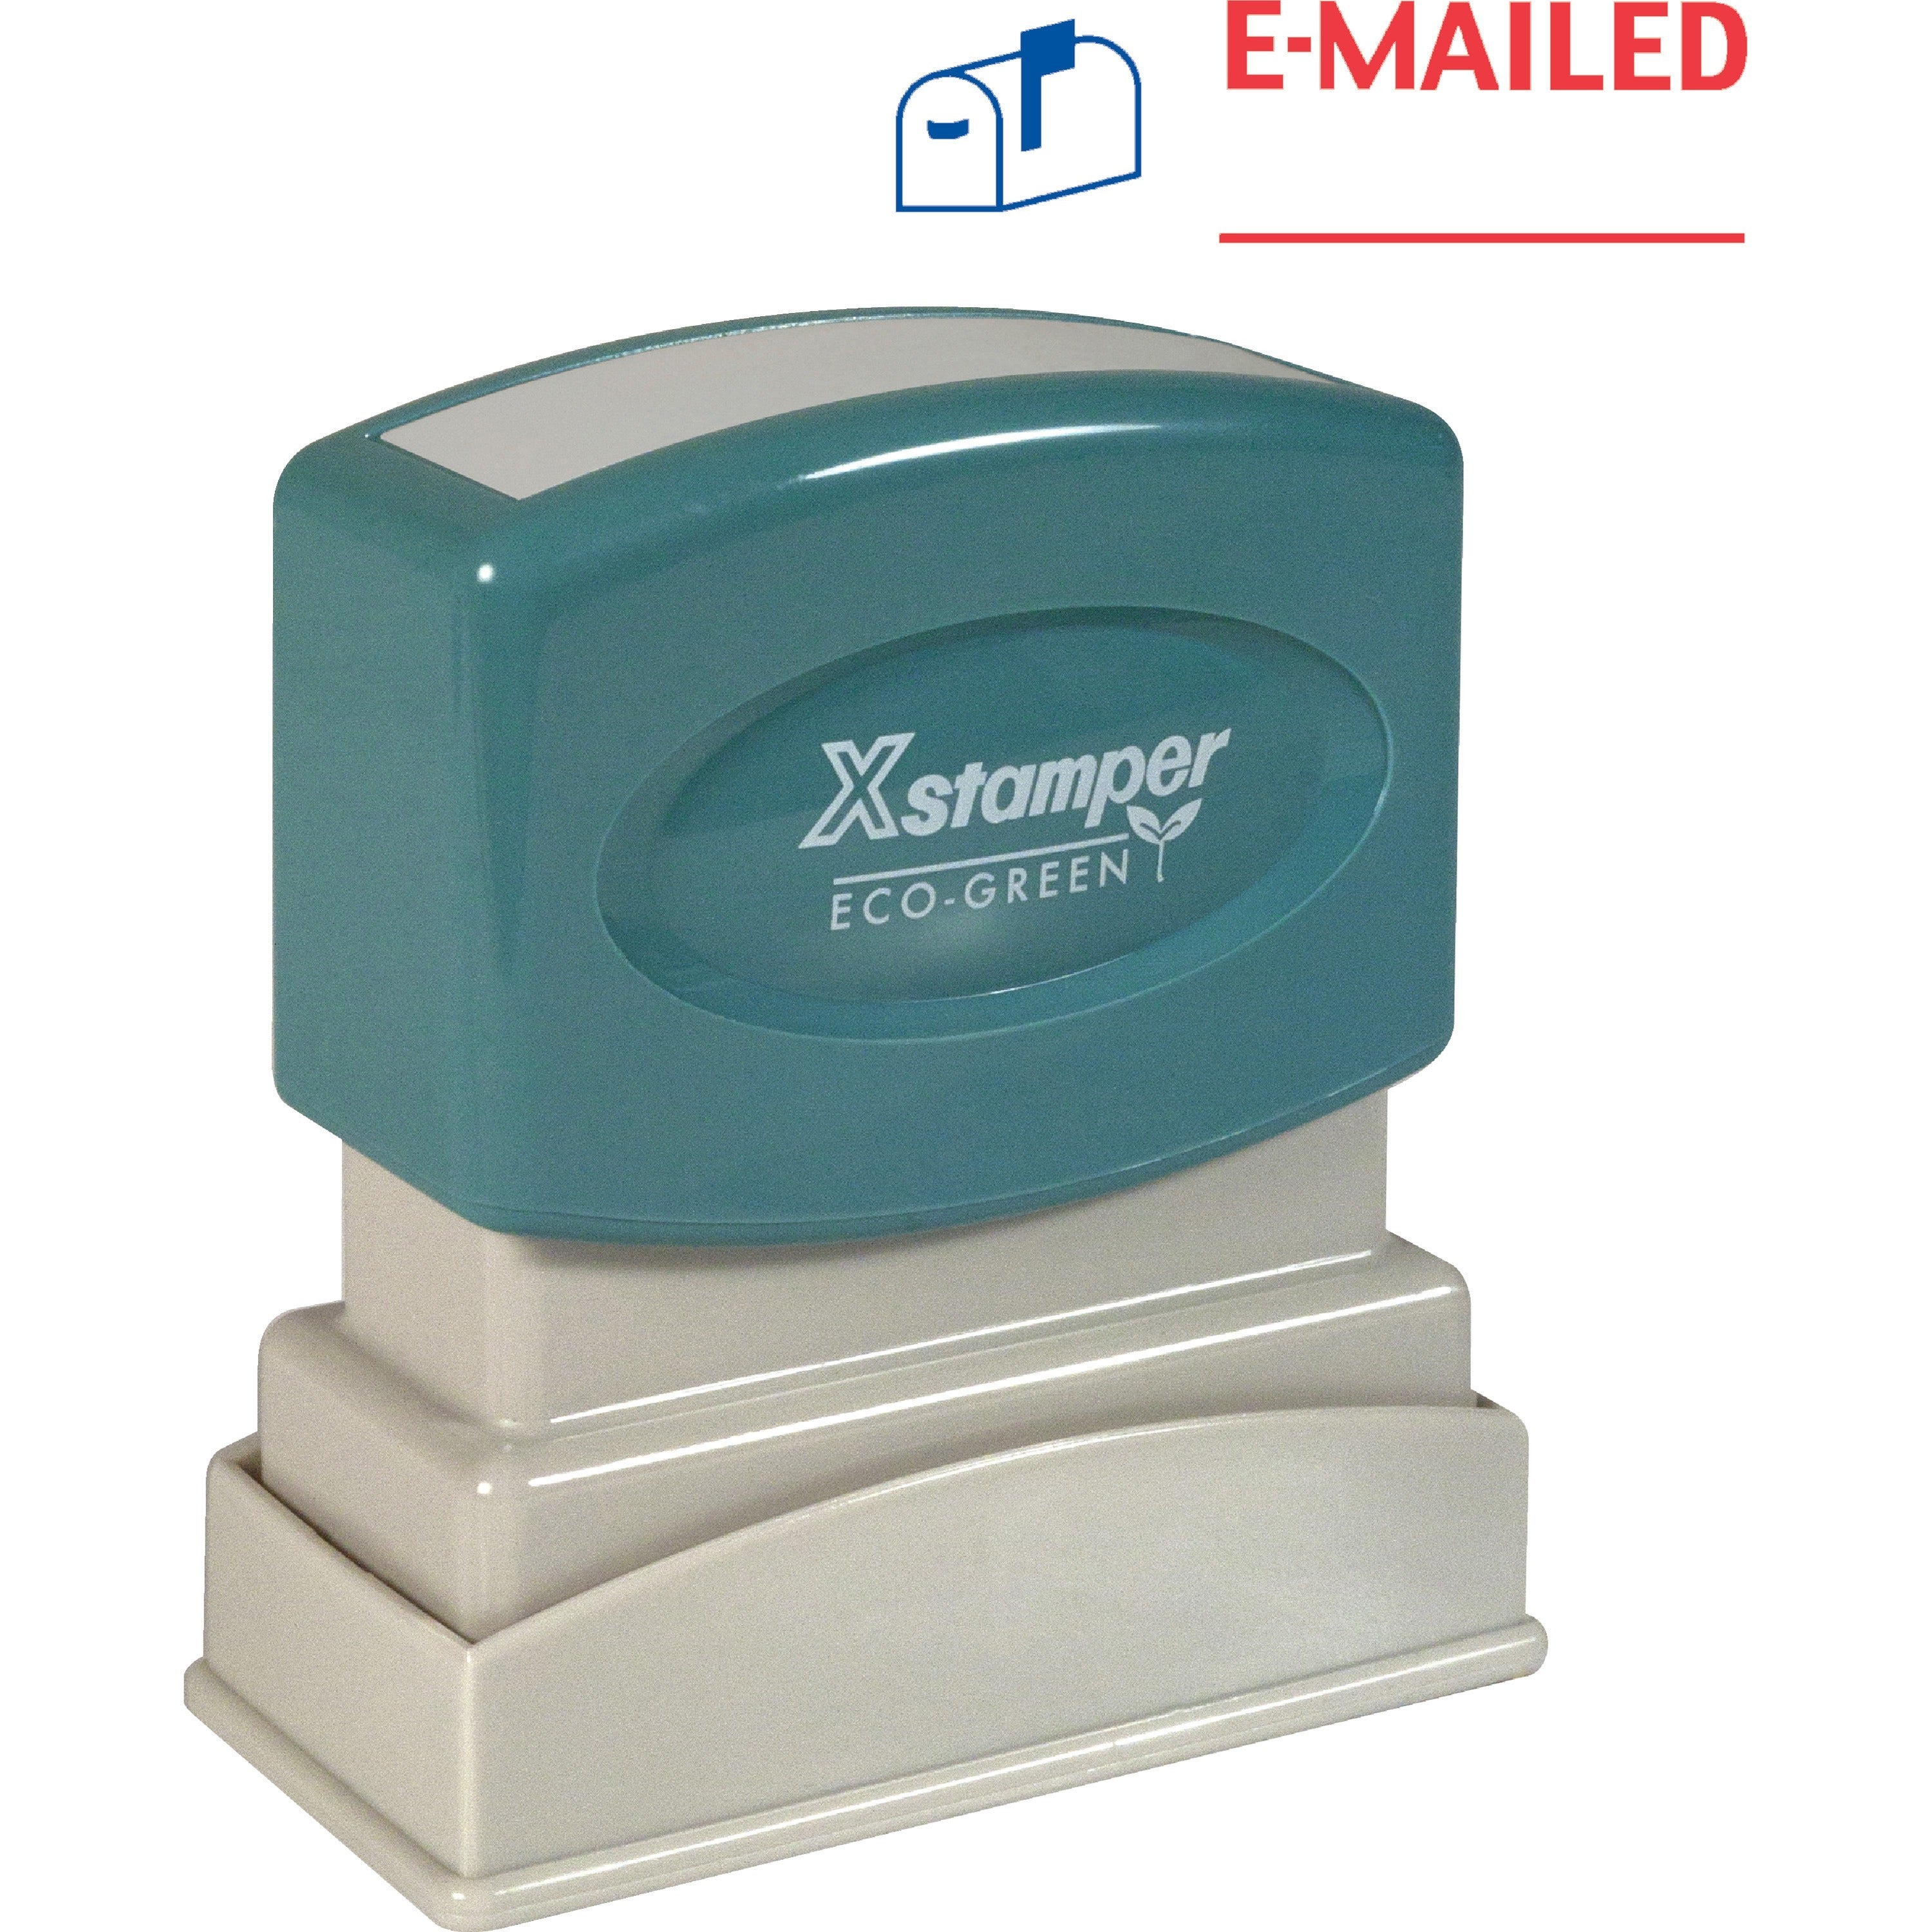 Xstamper E-MAILED Title Stamp - Message Stamp - "E-MAILED" - 0.50" Impression Width - 100000 Impression(s) - Blue, Red - Polymer Polymer - Recycled - 1 Each - 